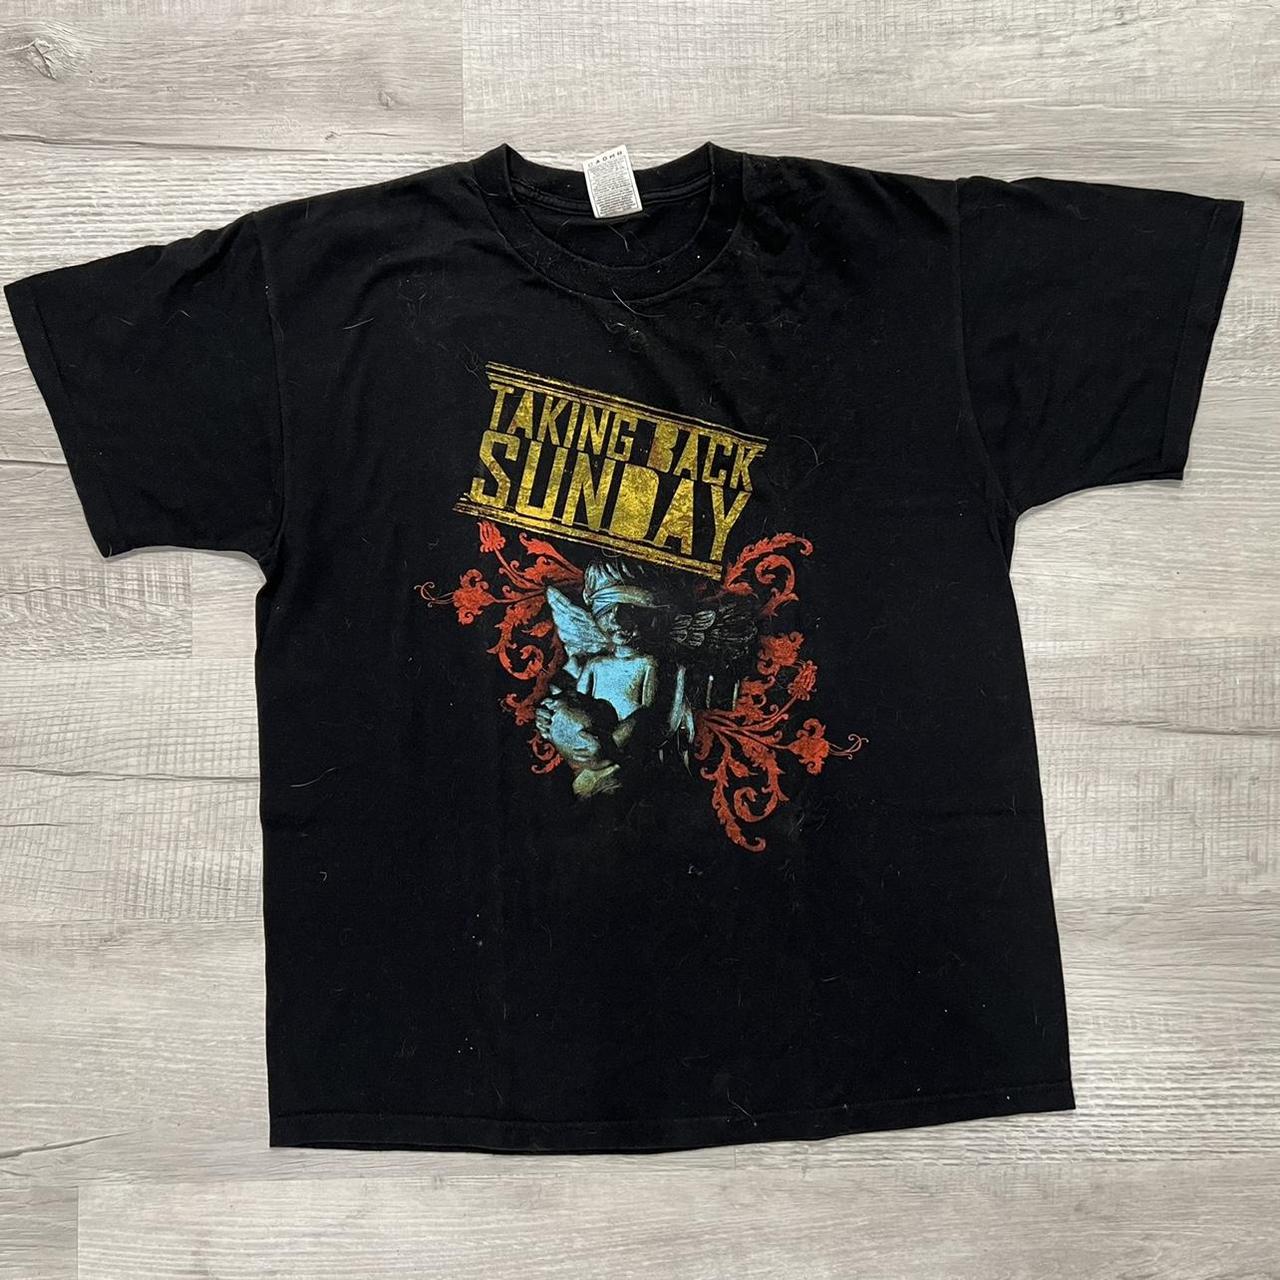 TAKING BACK SUNDAY shirt from 2006 “Louder Now”... - Depop